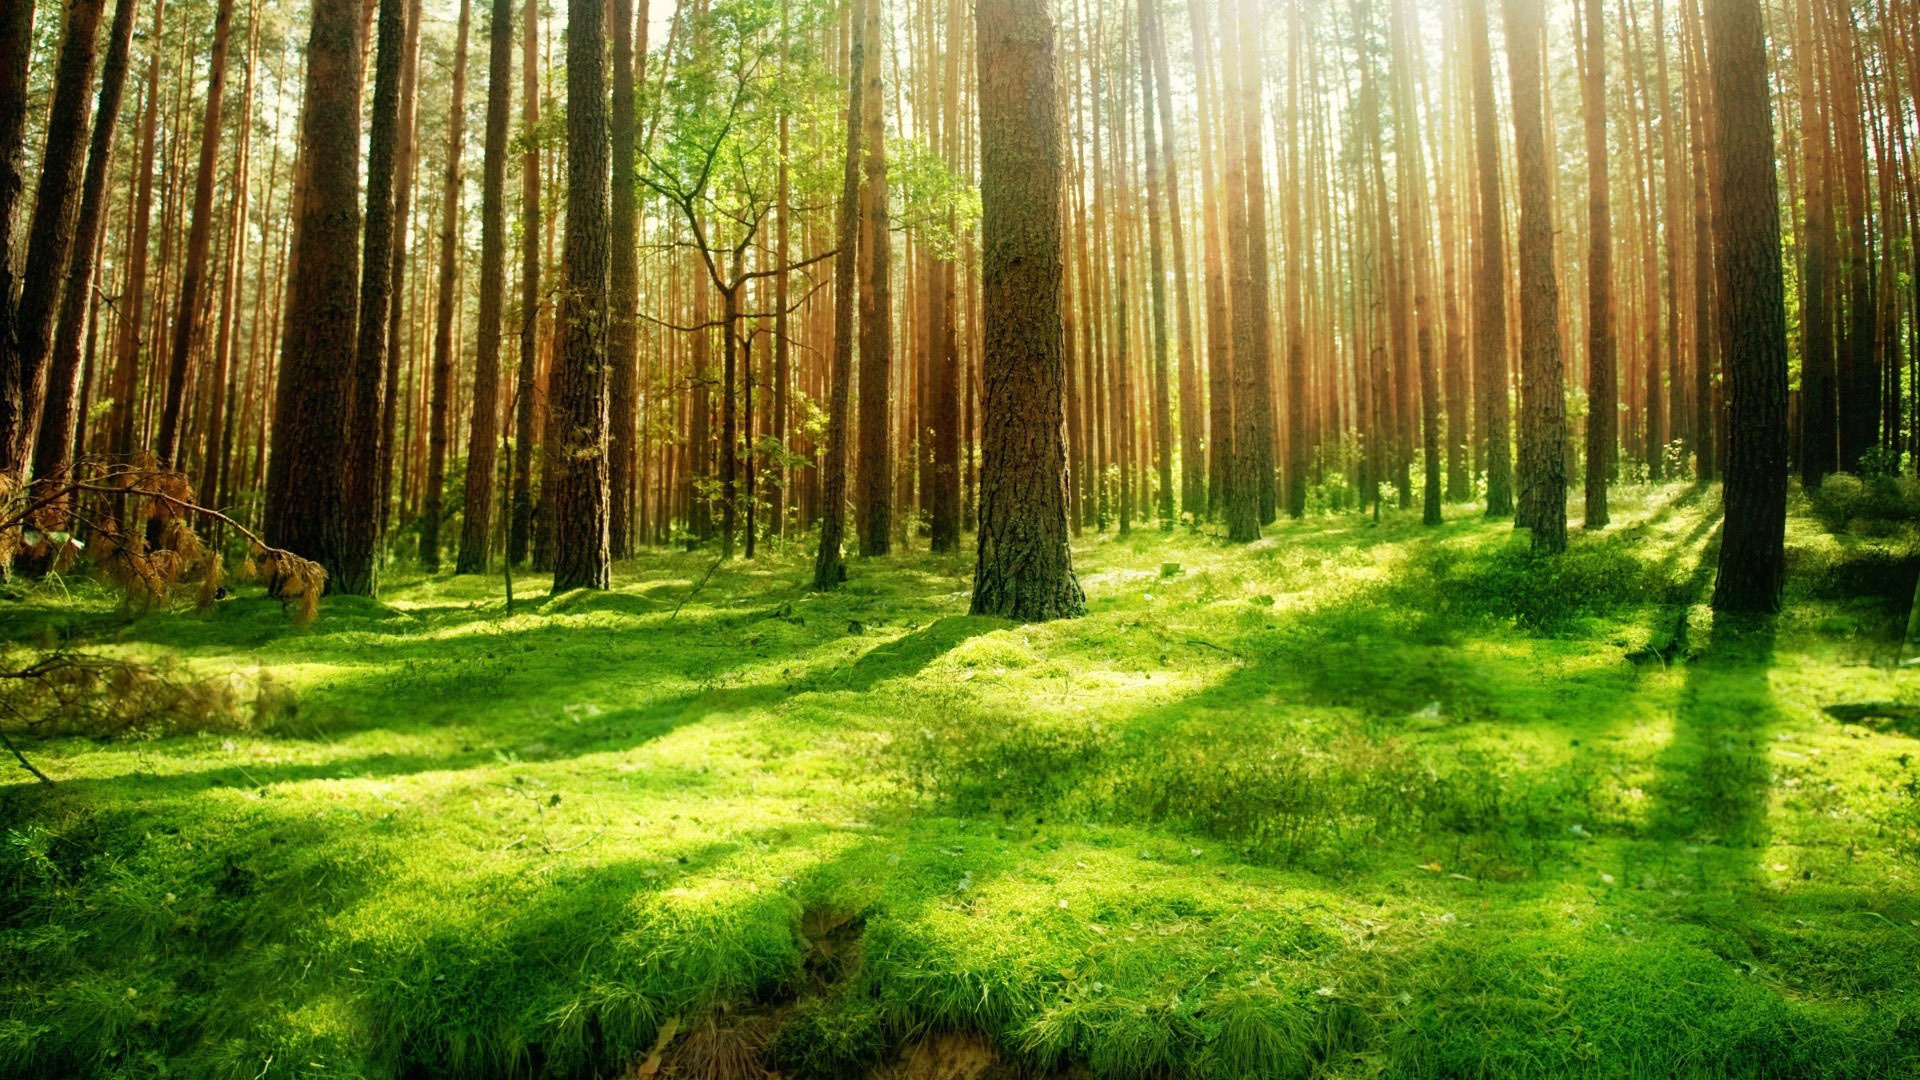  74 Forest Background  Images on WallpaperSafari